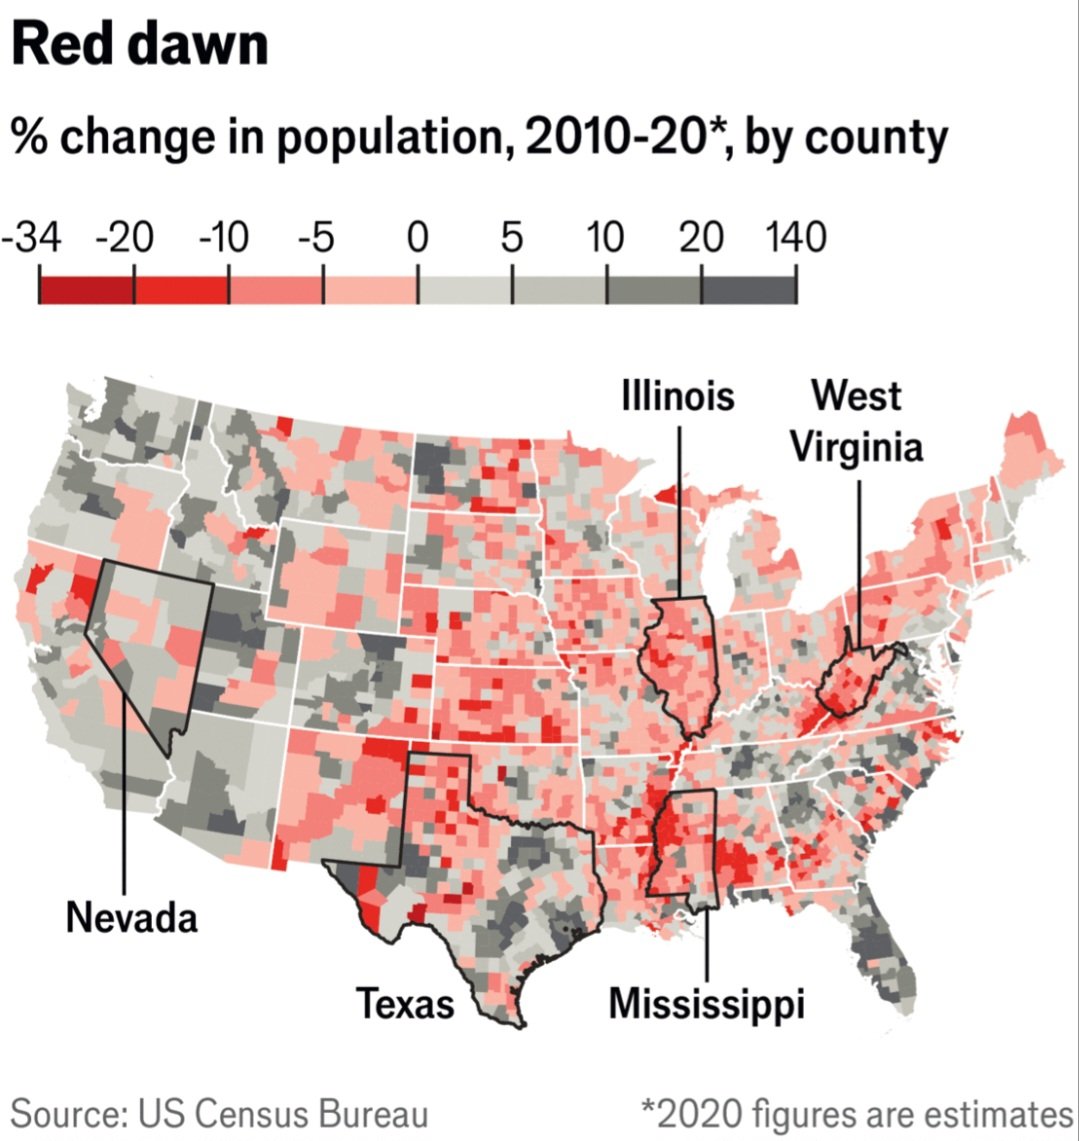 U.S. percent change in population by county from 2010 to 2020 from @TheEconomist